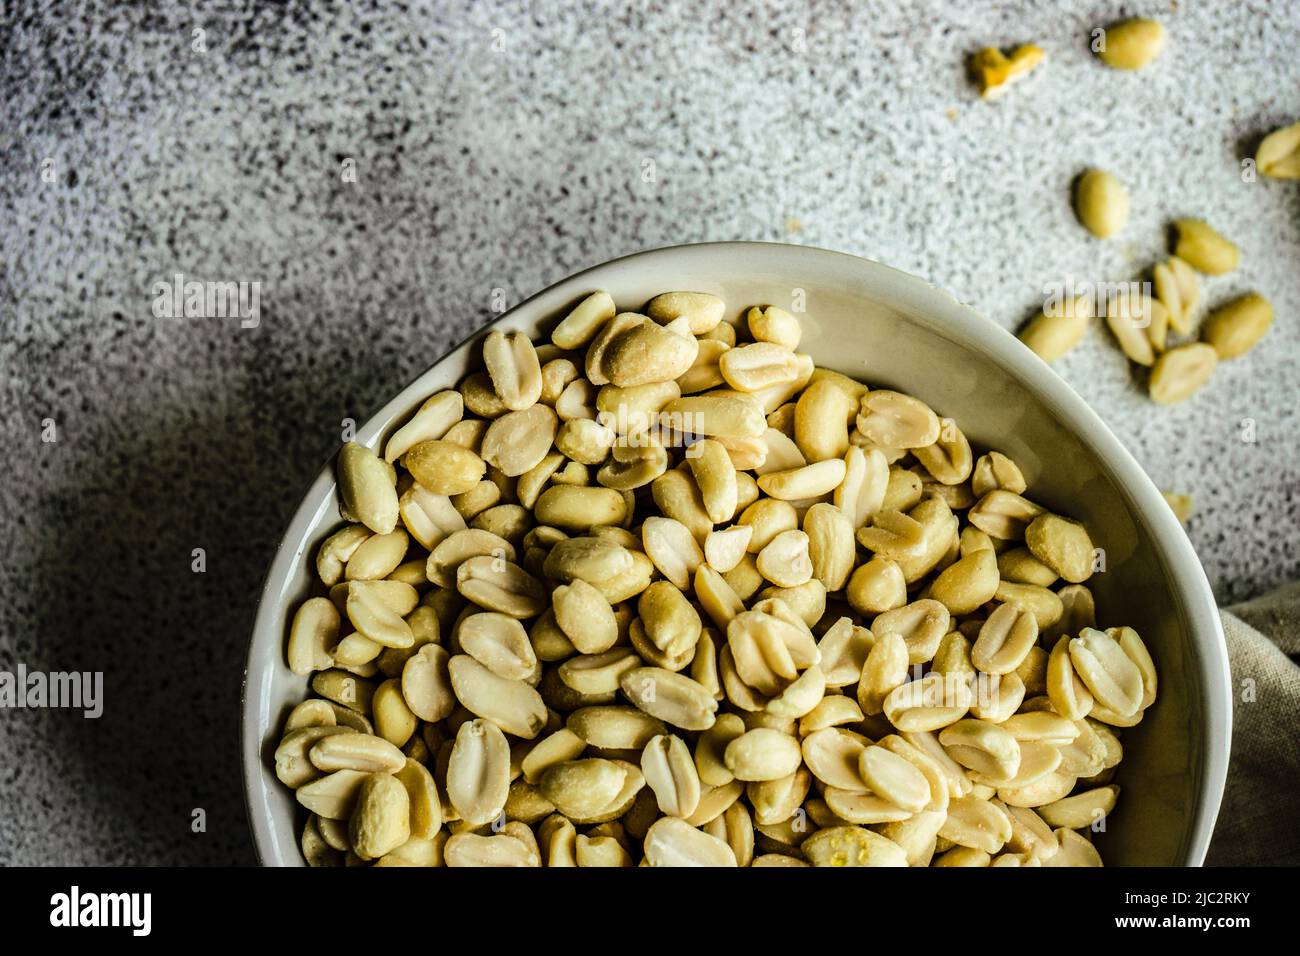 Overhead view of a bowl of peanuts Stock Photo